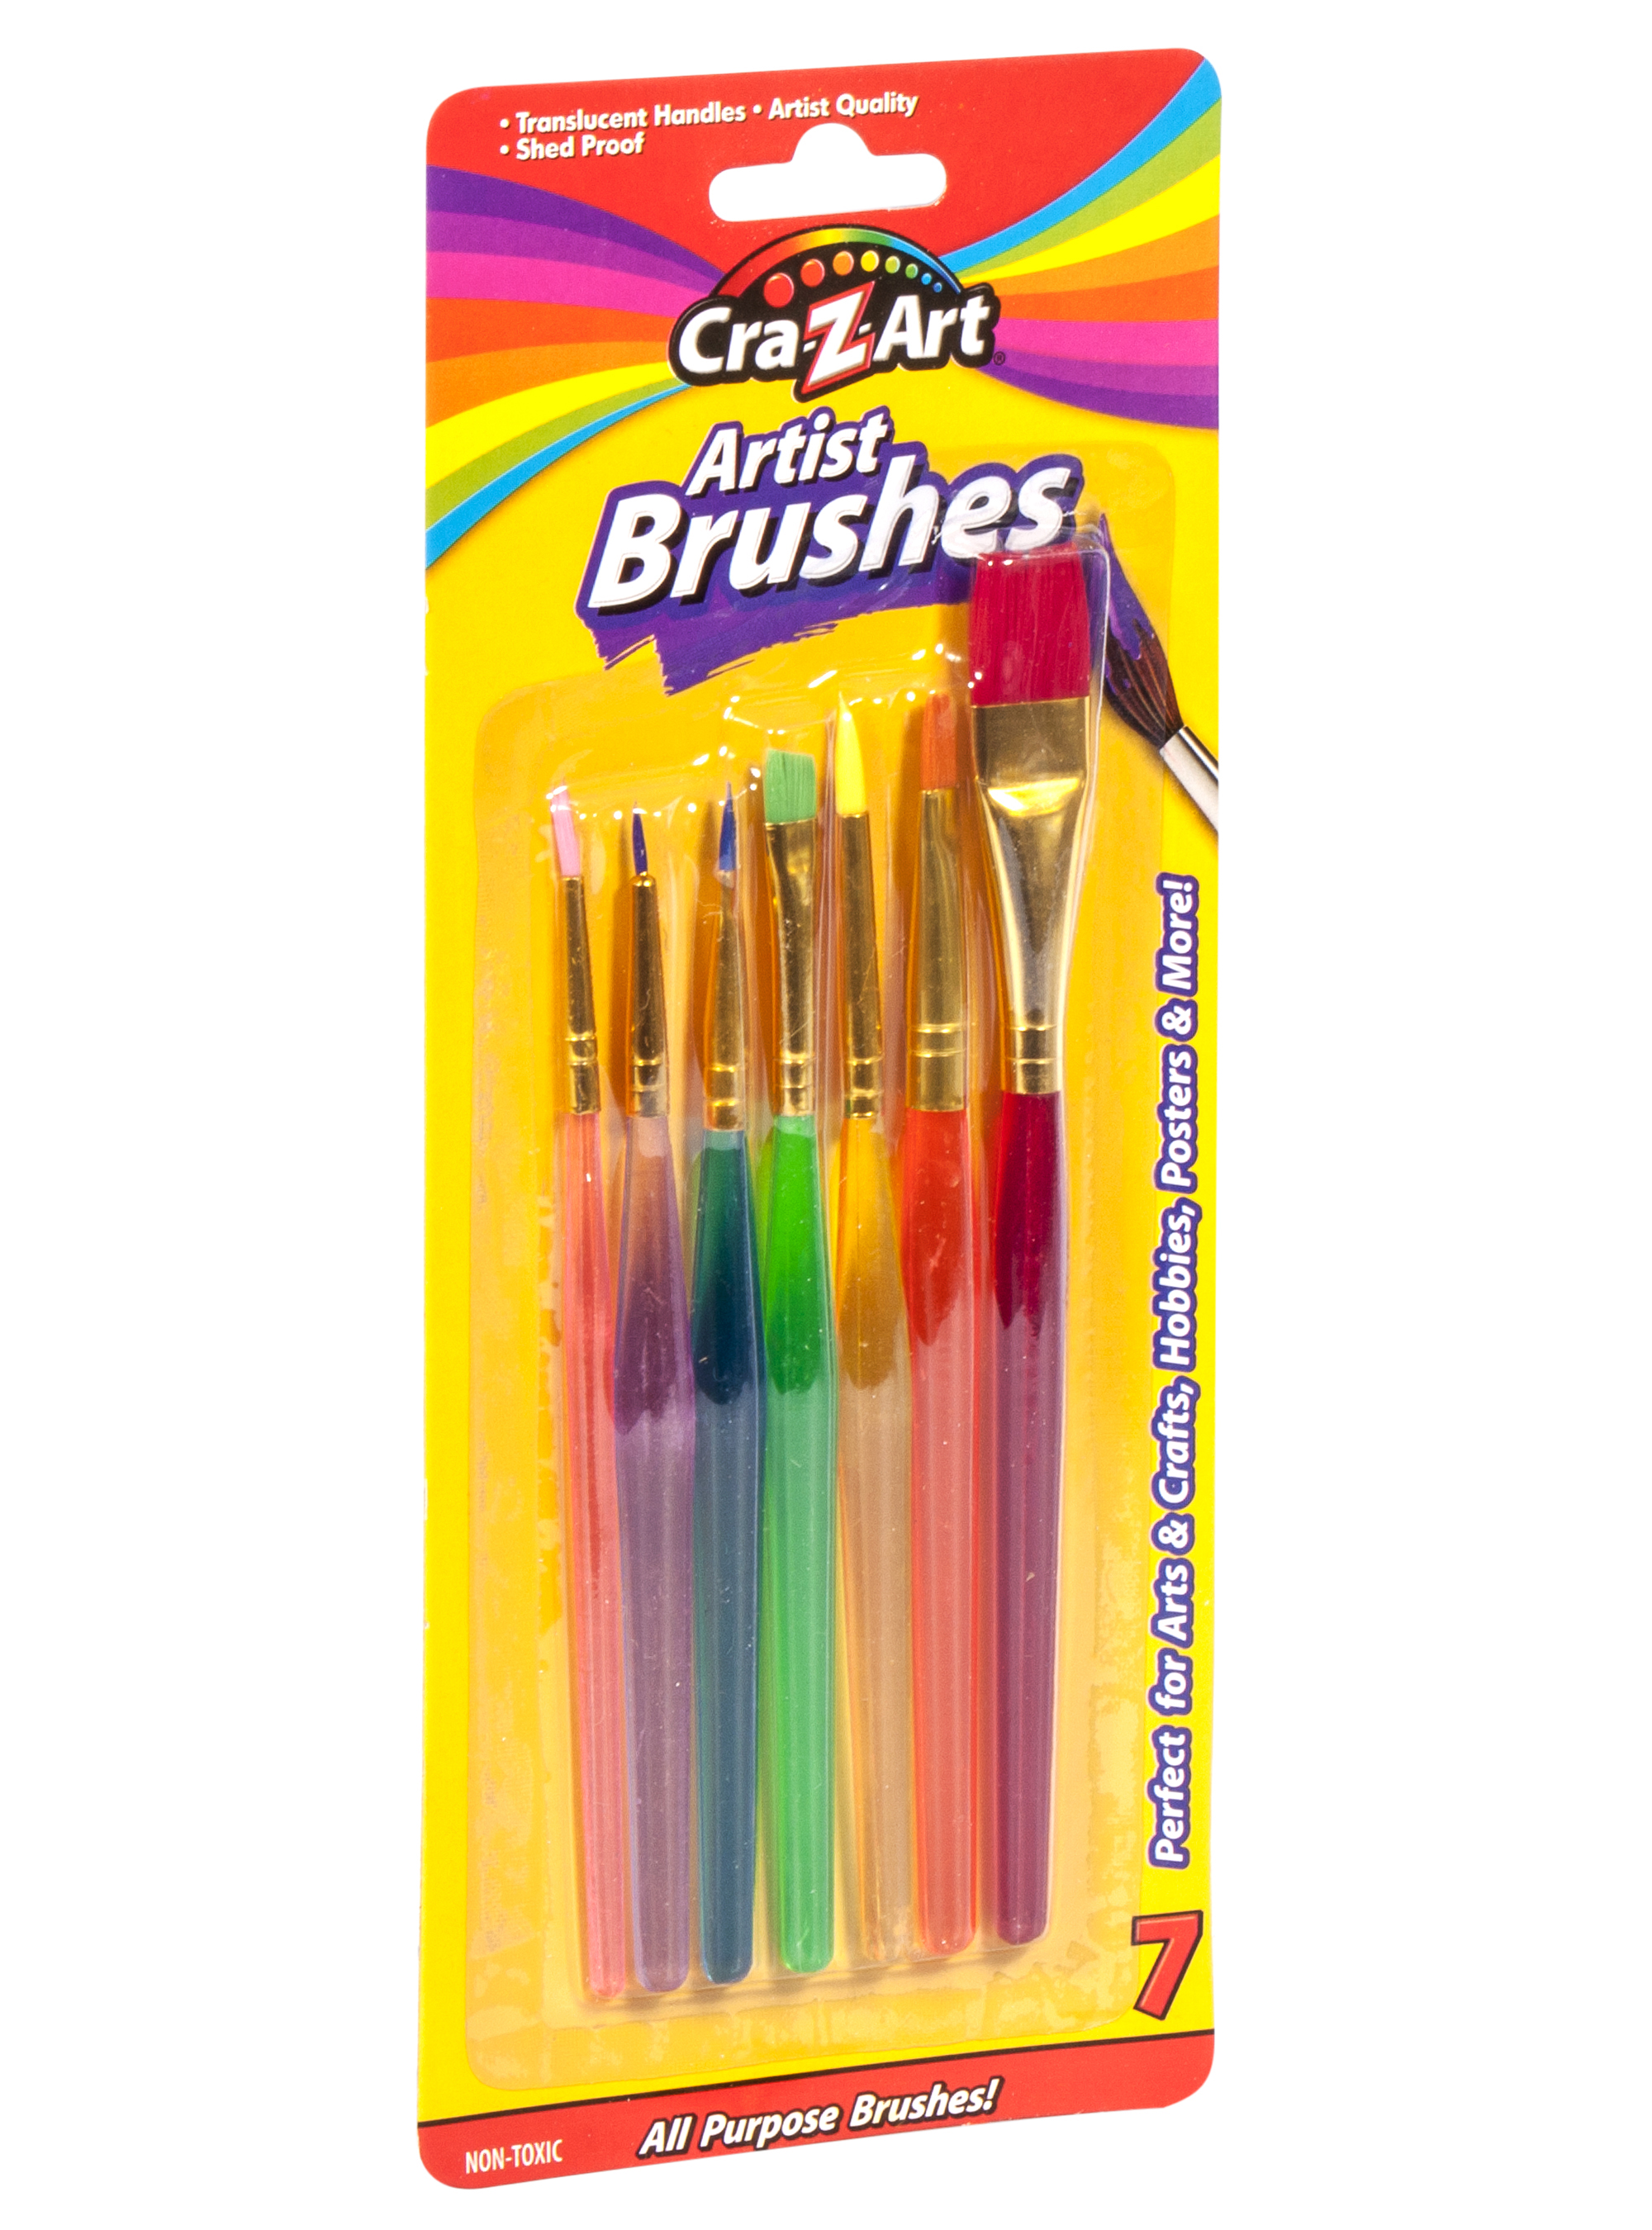 Cra-Z-Art All Purpose Artist Paint Brushes, Multicolor, 7 Count, Child to Adult, Back to School - image 5 of 9